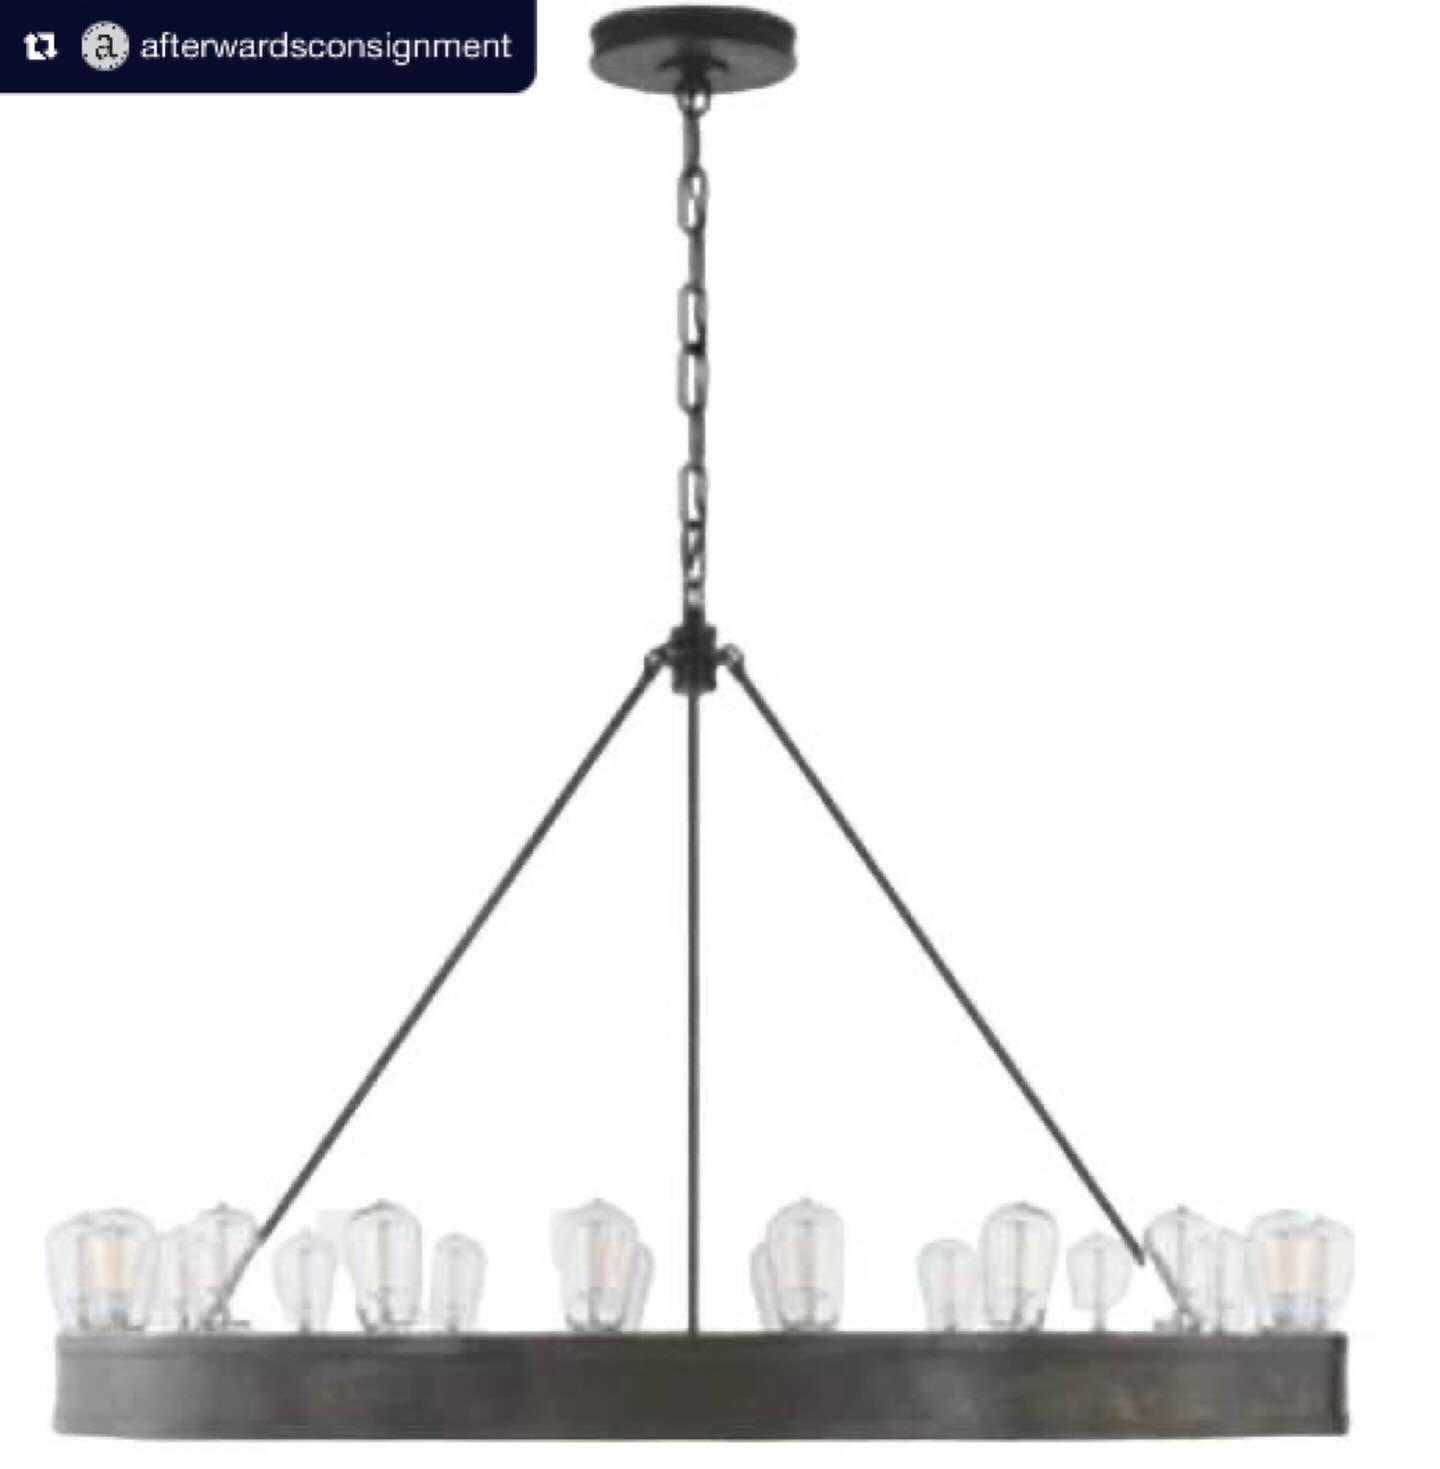 Repost from @afterwardsconsignment
&bull;
Ralph Lauren Roark 30&rdquo; Modular Ring Chandelier. Suspended by a chain, it features a halo of 16 exposed bulbs that cast brilliant light throughout the room. The modular design allows for the bulbs to be 